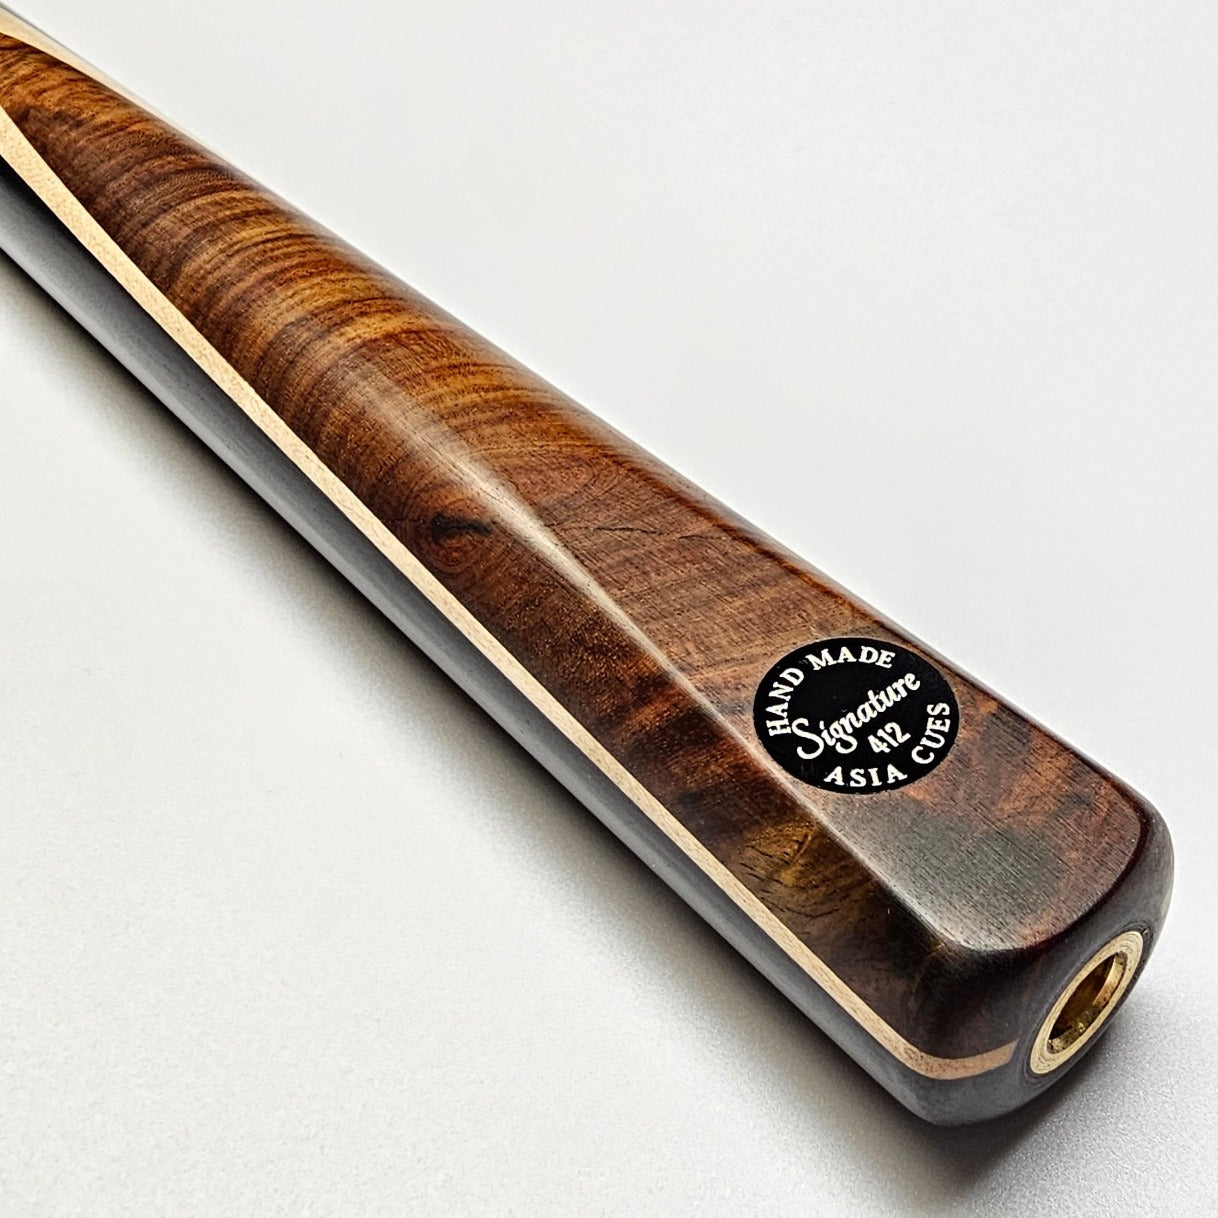 Asia Cues Signature One Piece Snooker Cue  Handmade Ebony Butt with Front splice of Siam Rosewood and Thick Maple Veneer. Badge view